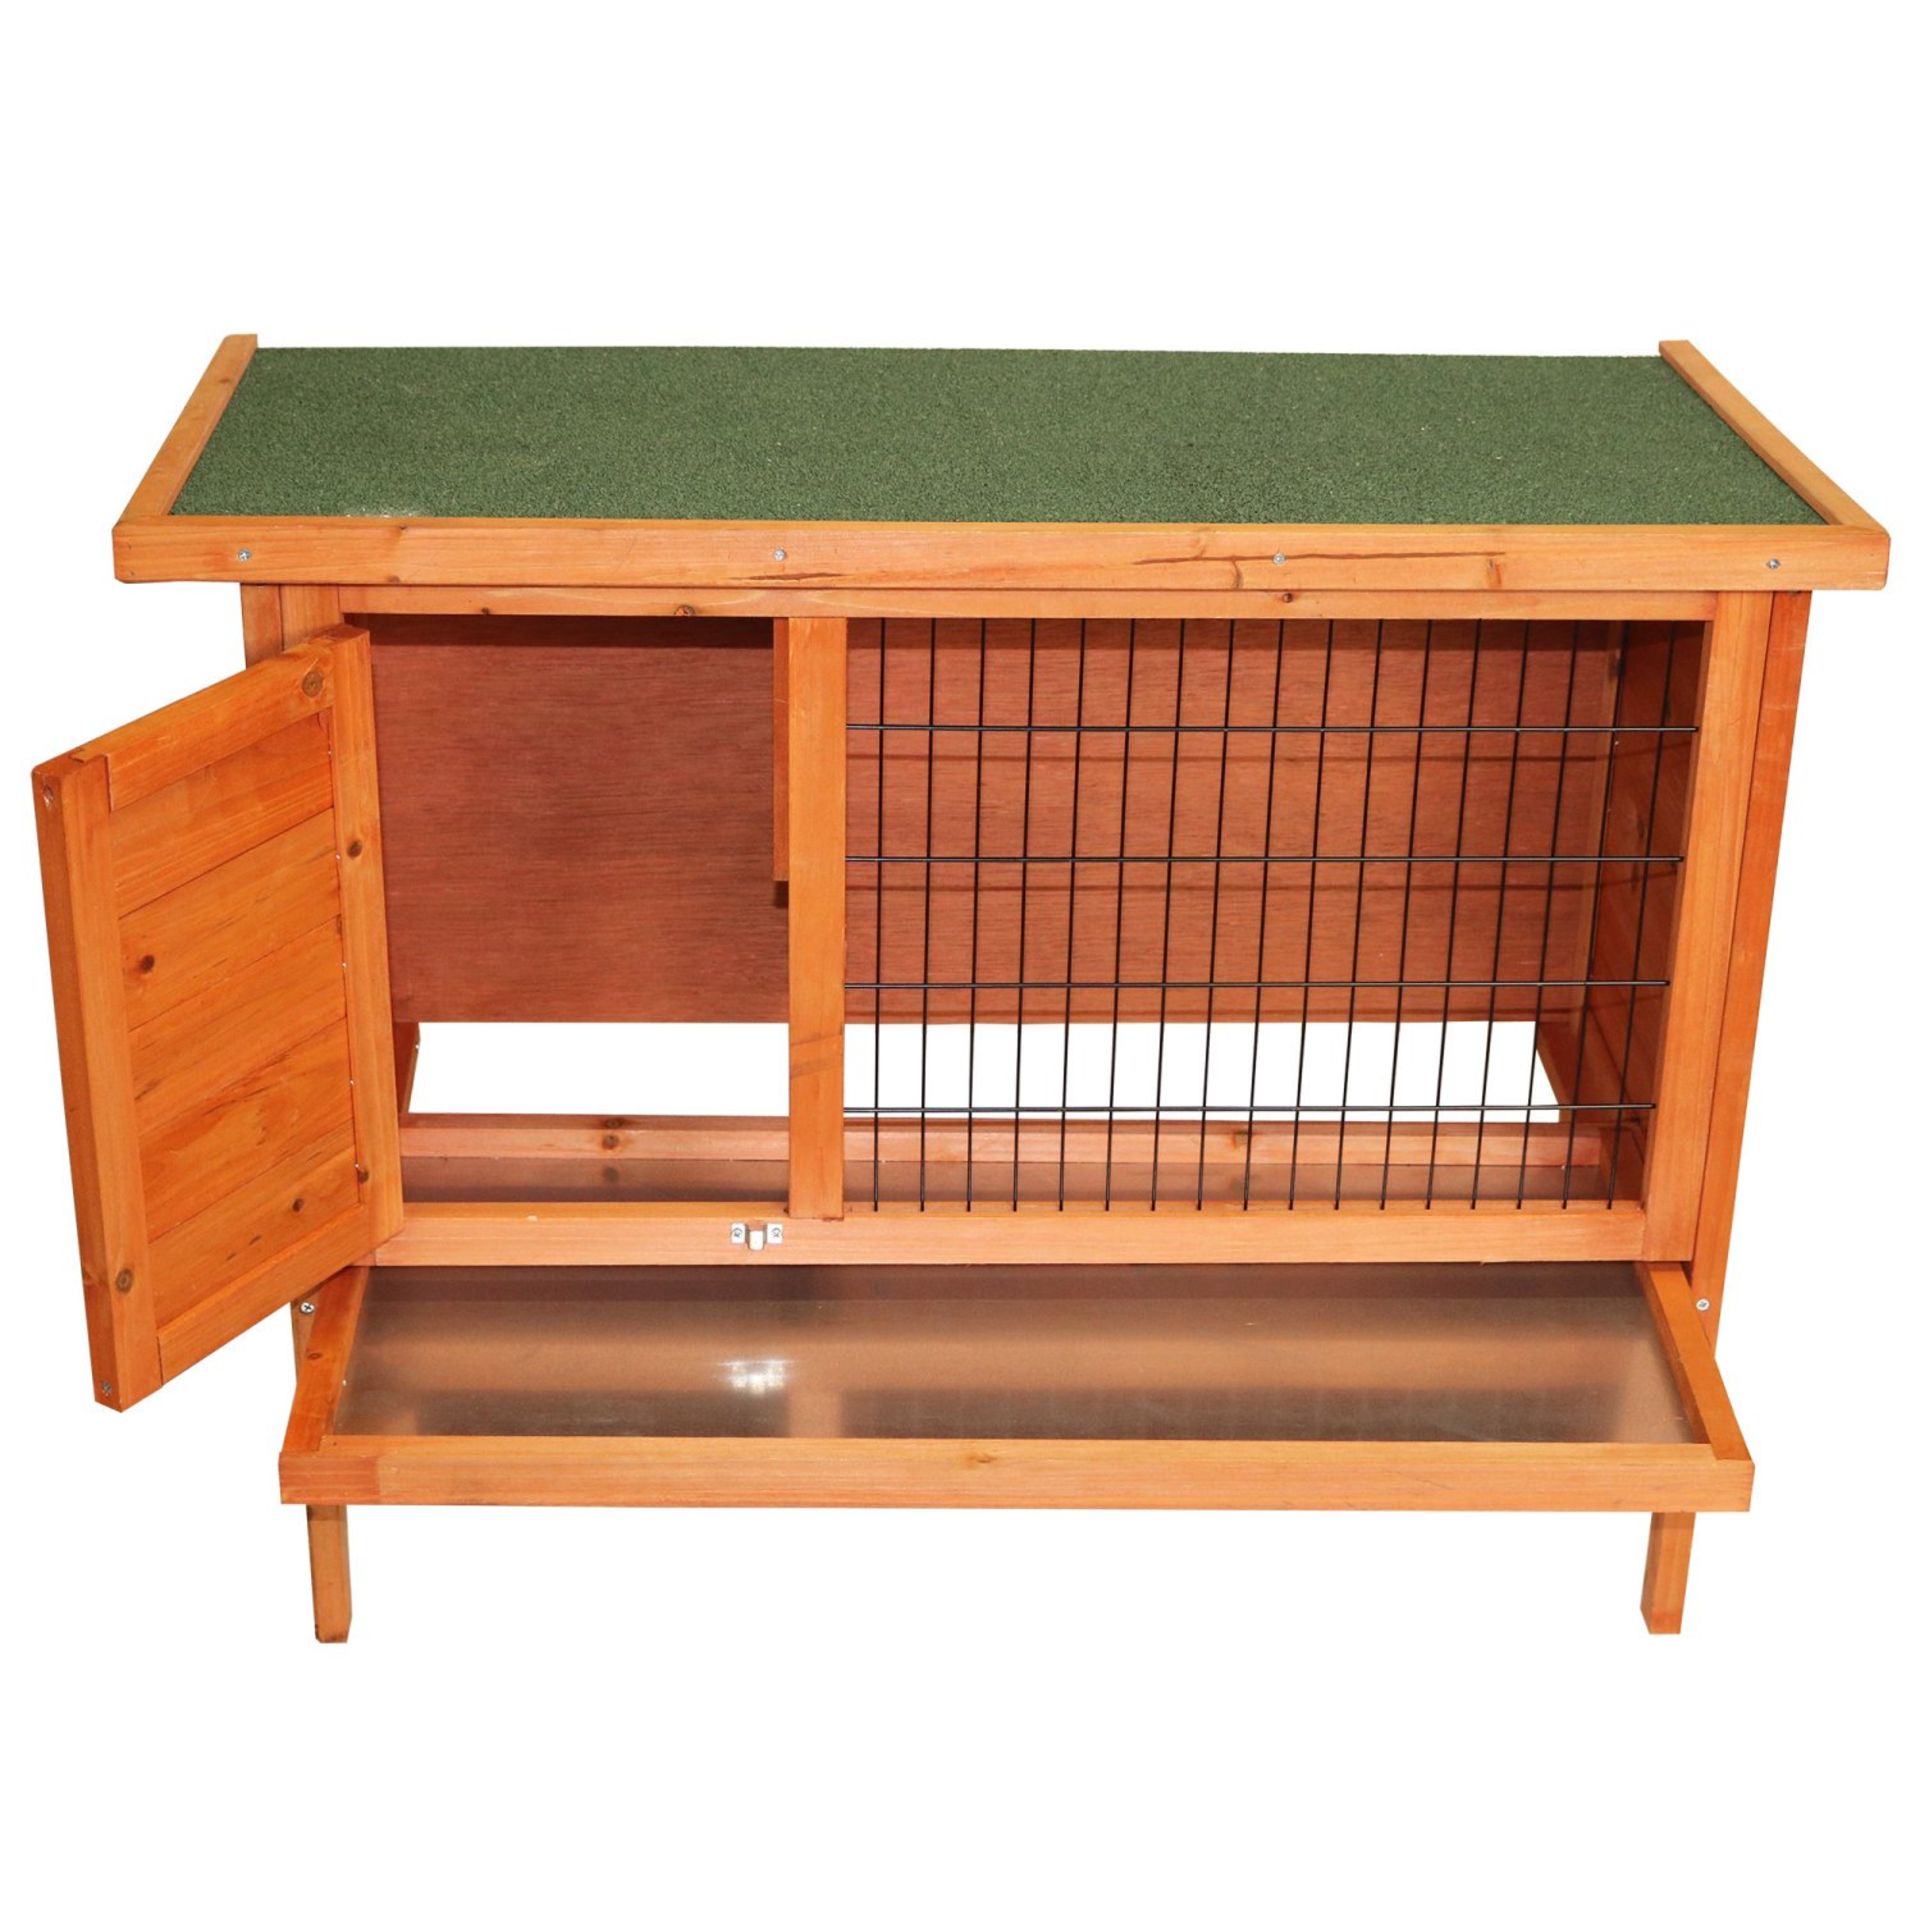 (ZP40) Single Rabbit Hutch 820x390x700mm Made to the highest standards with anti f... - Image 2 of 2